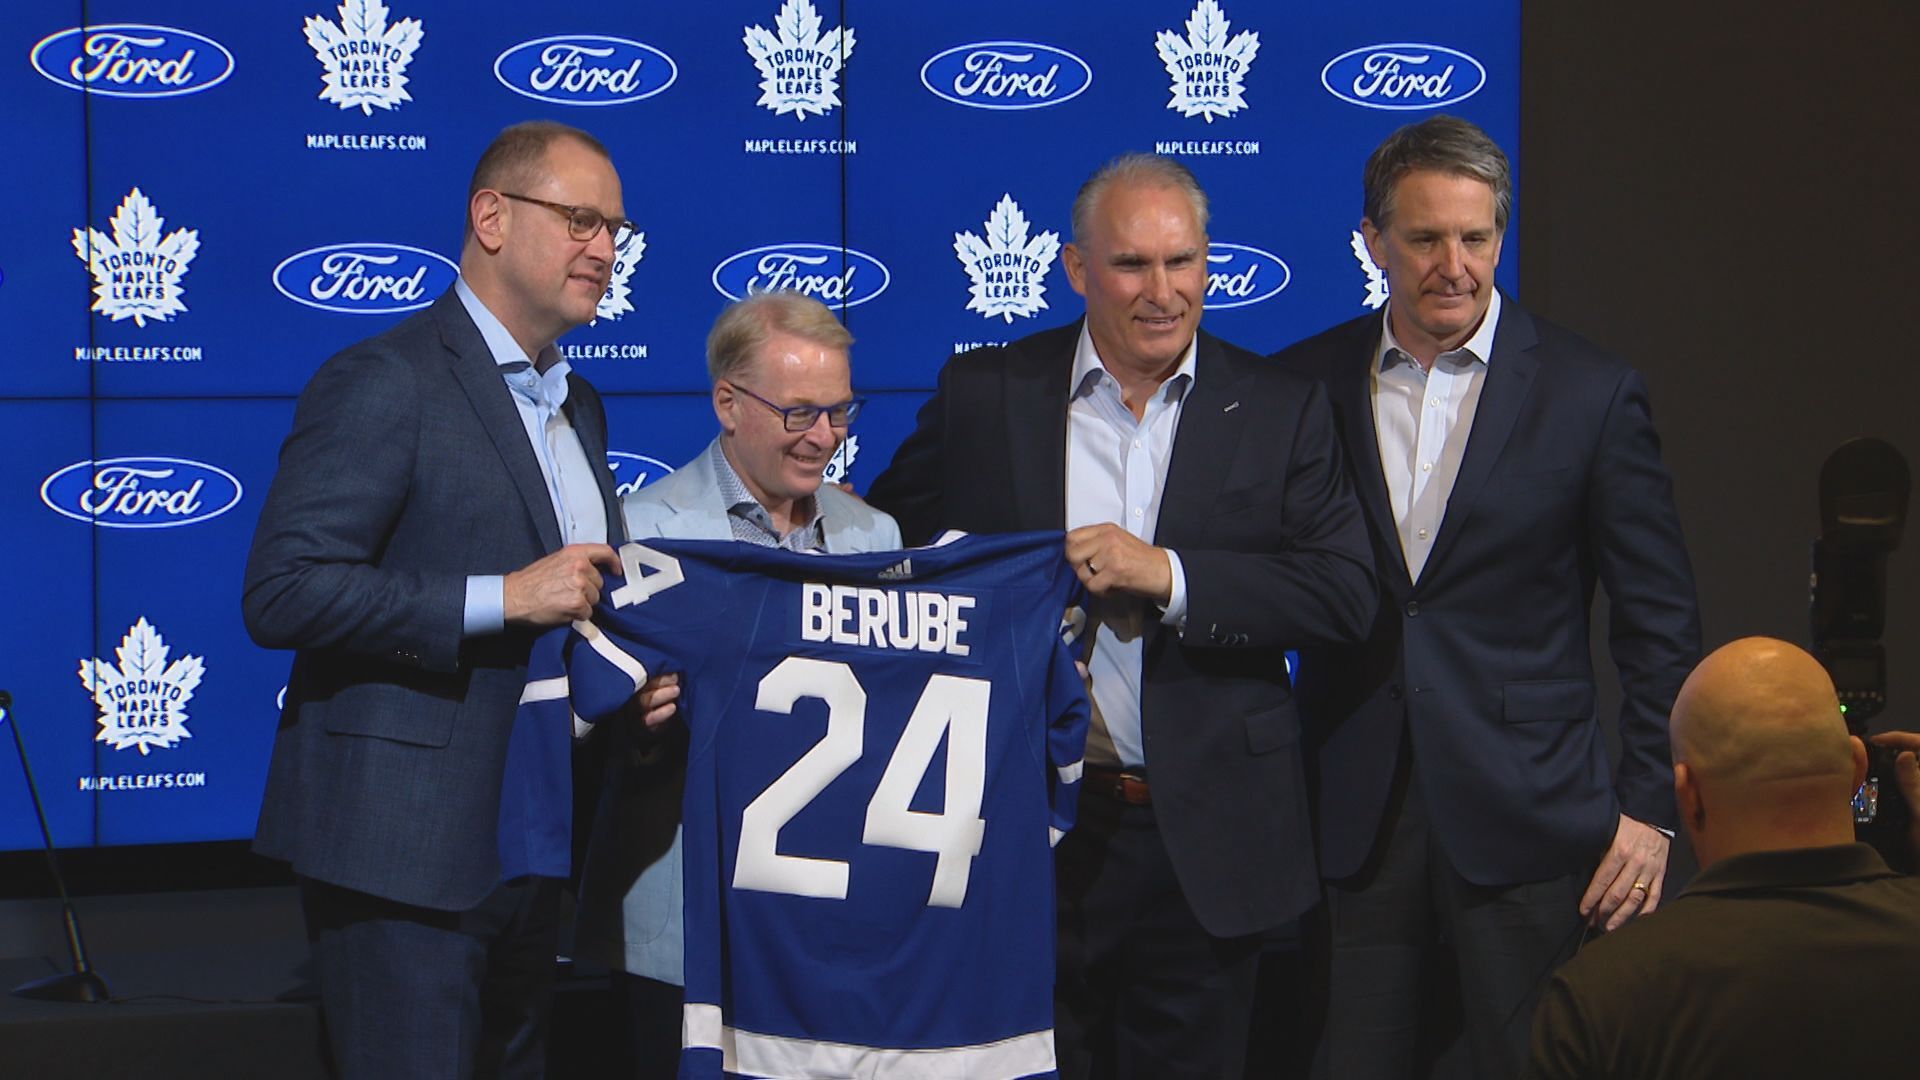 Leafs President fought new Head Coach during career